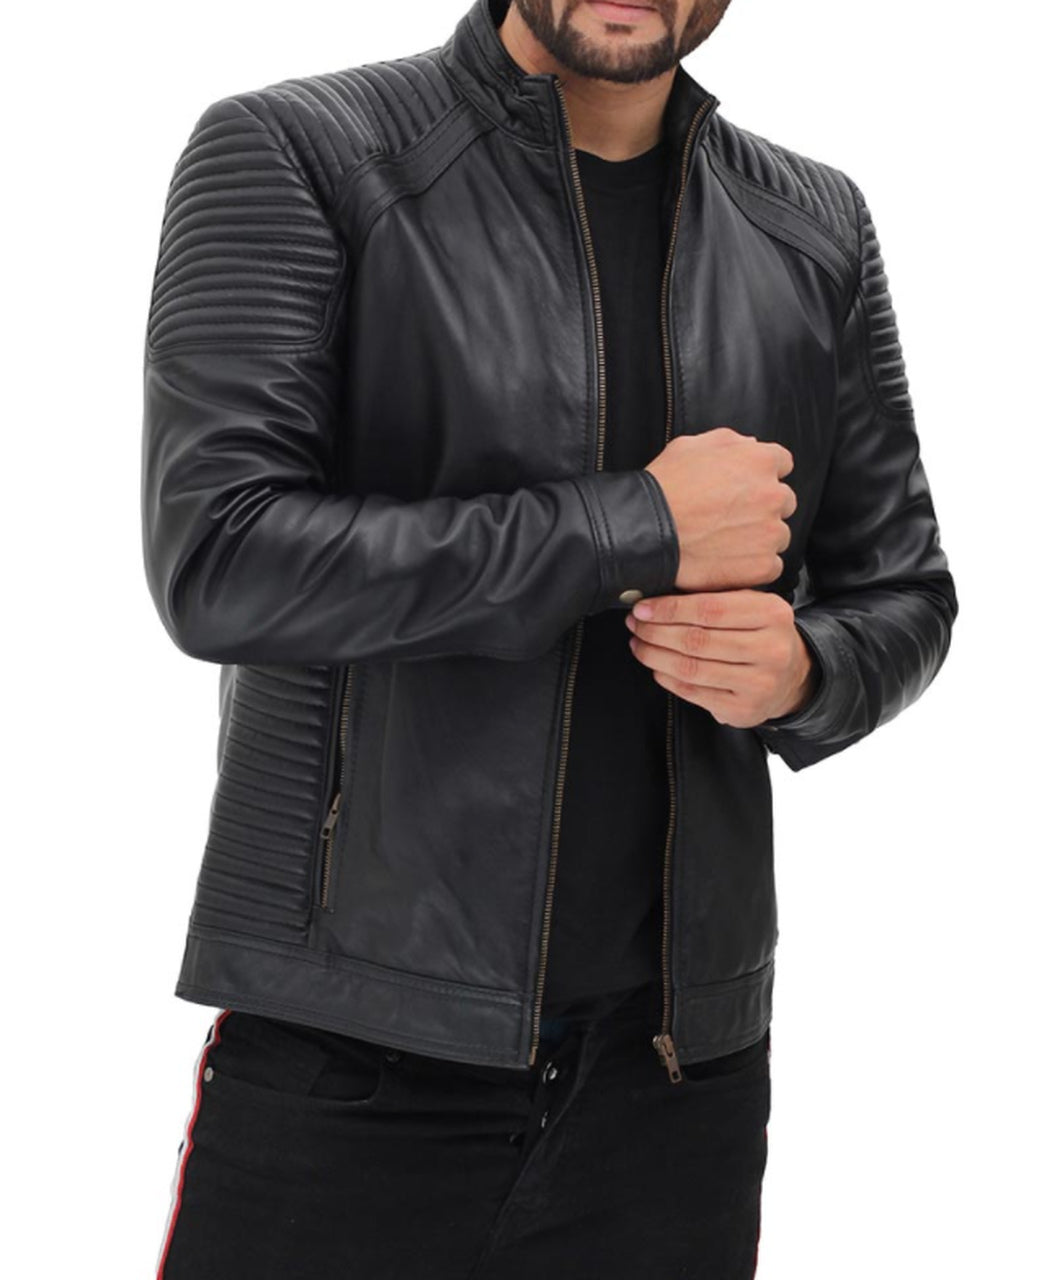 Men Fitted Genuine Leather Jacket With Shoulder Lining Padding ...